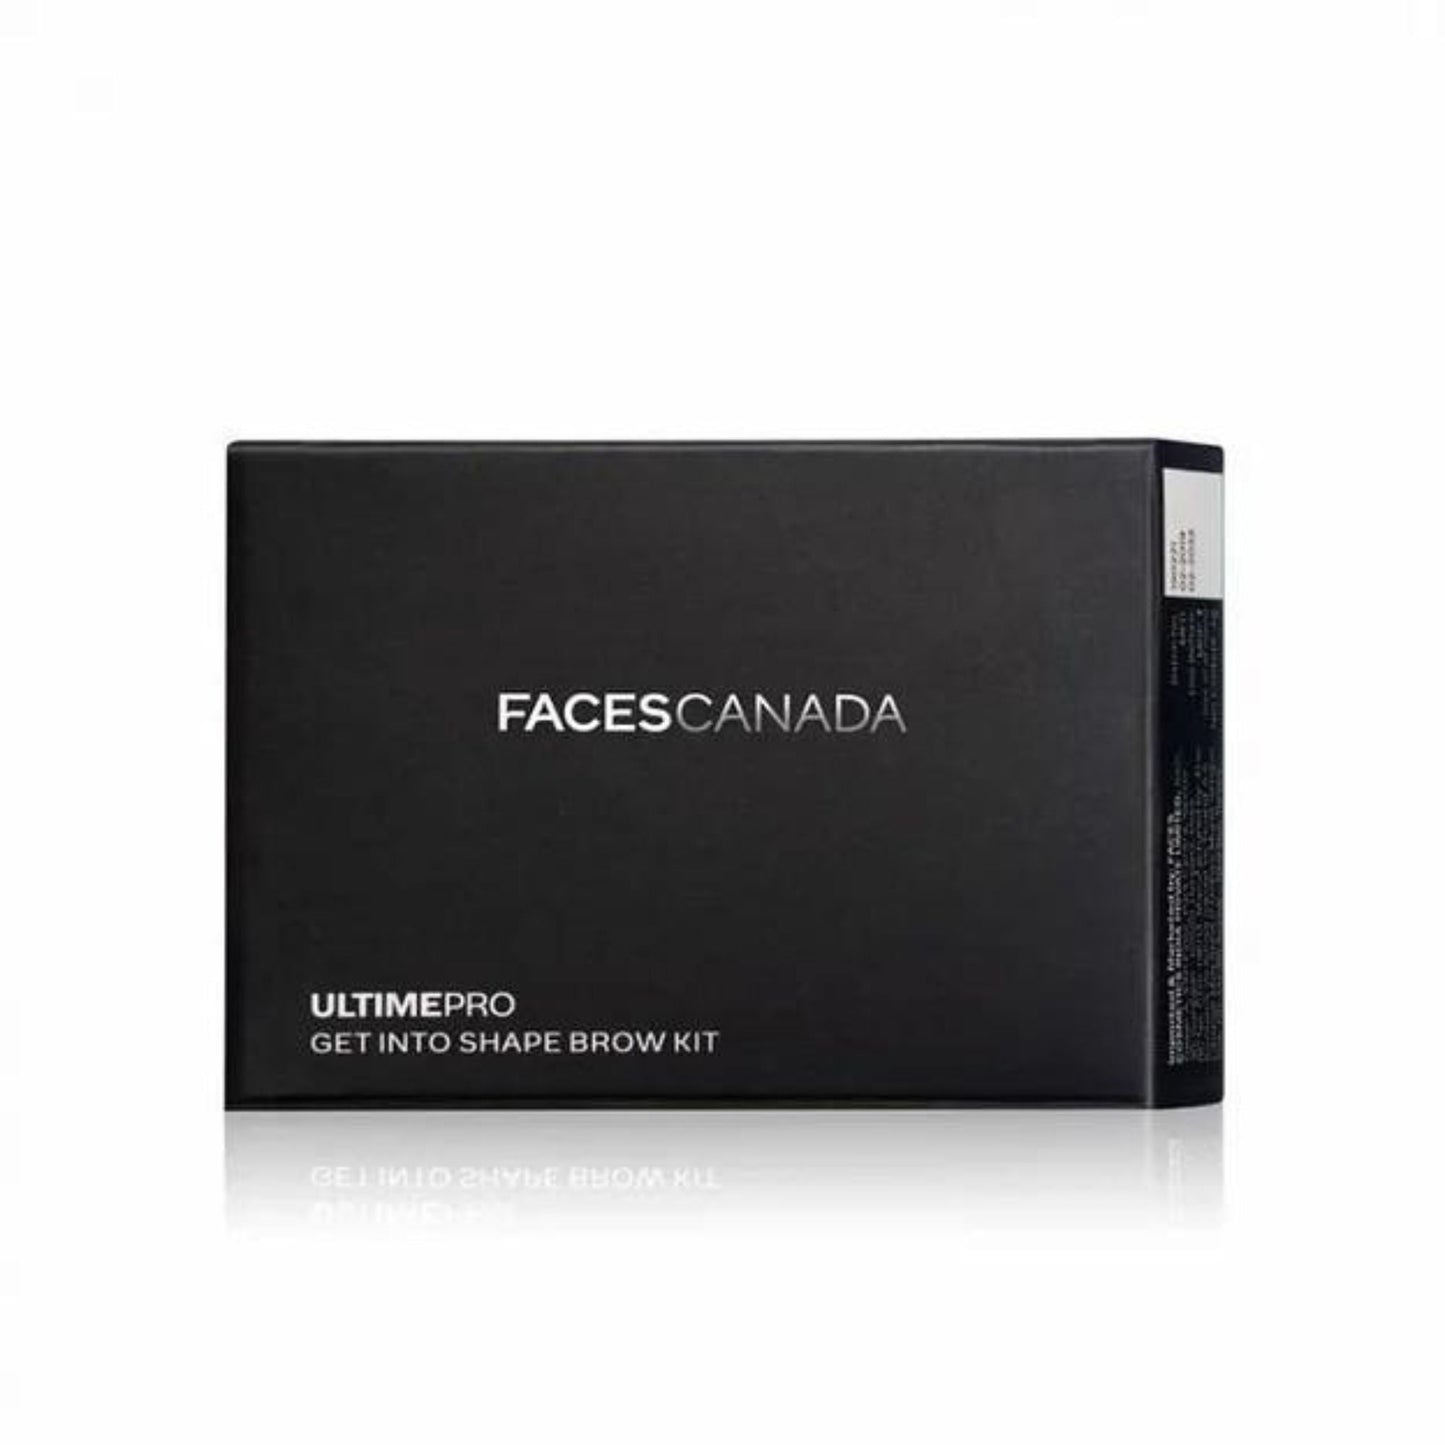 Faces Canada Ultime Pro Get Into Shape Brow Kit 4gm